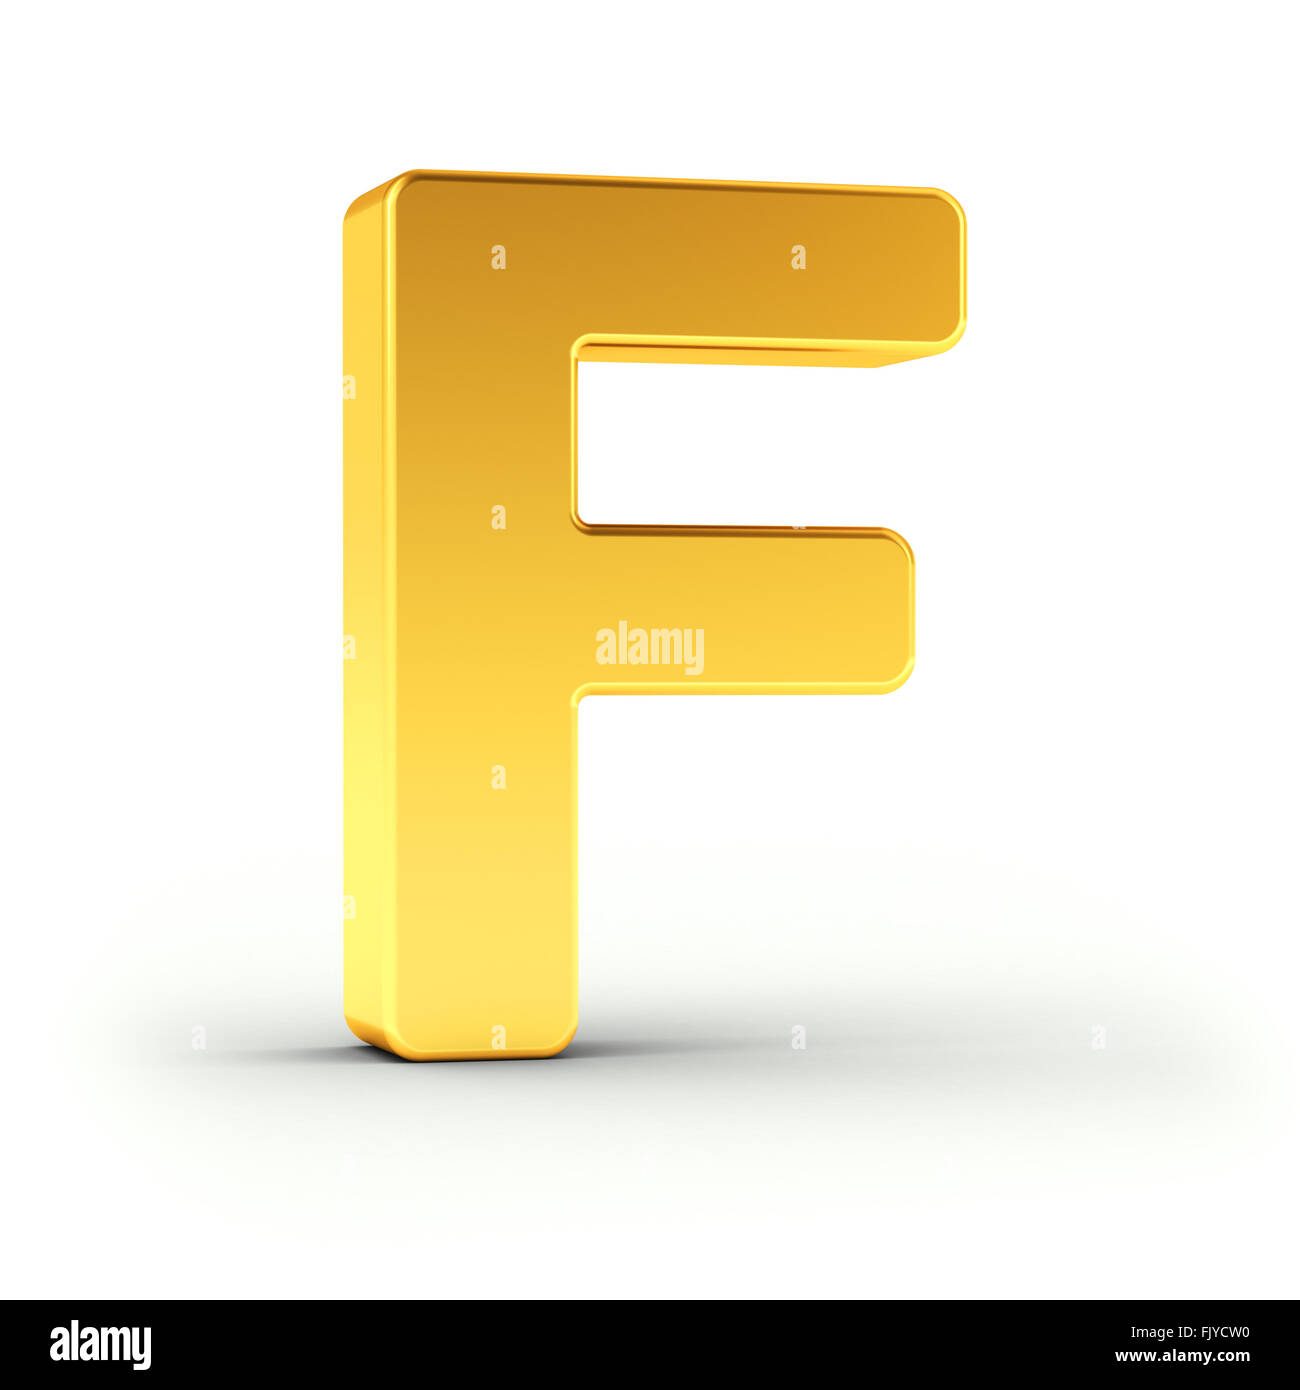 The Letter F as a polished golden object Stock Photo